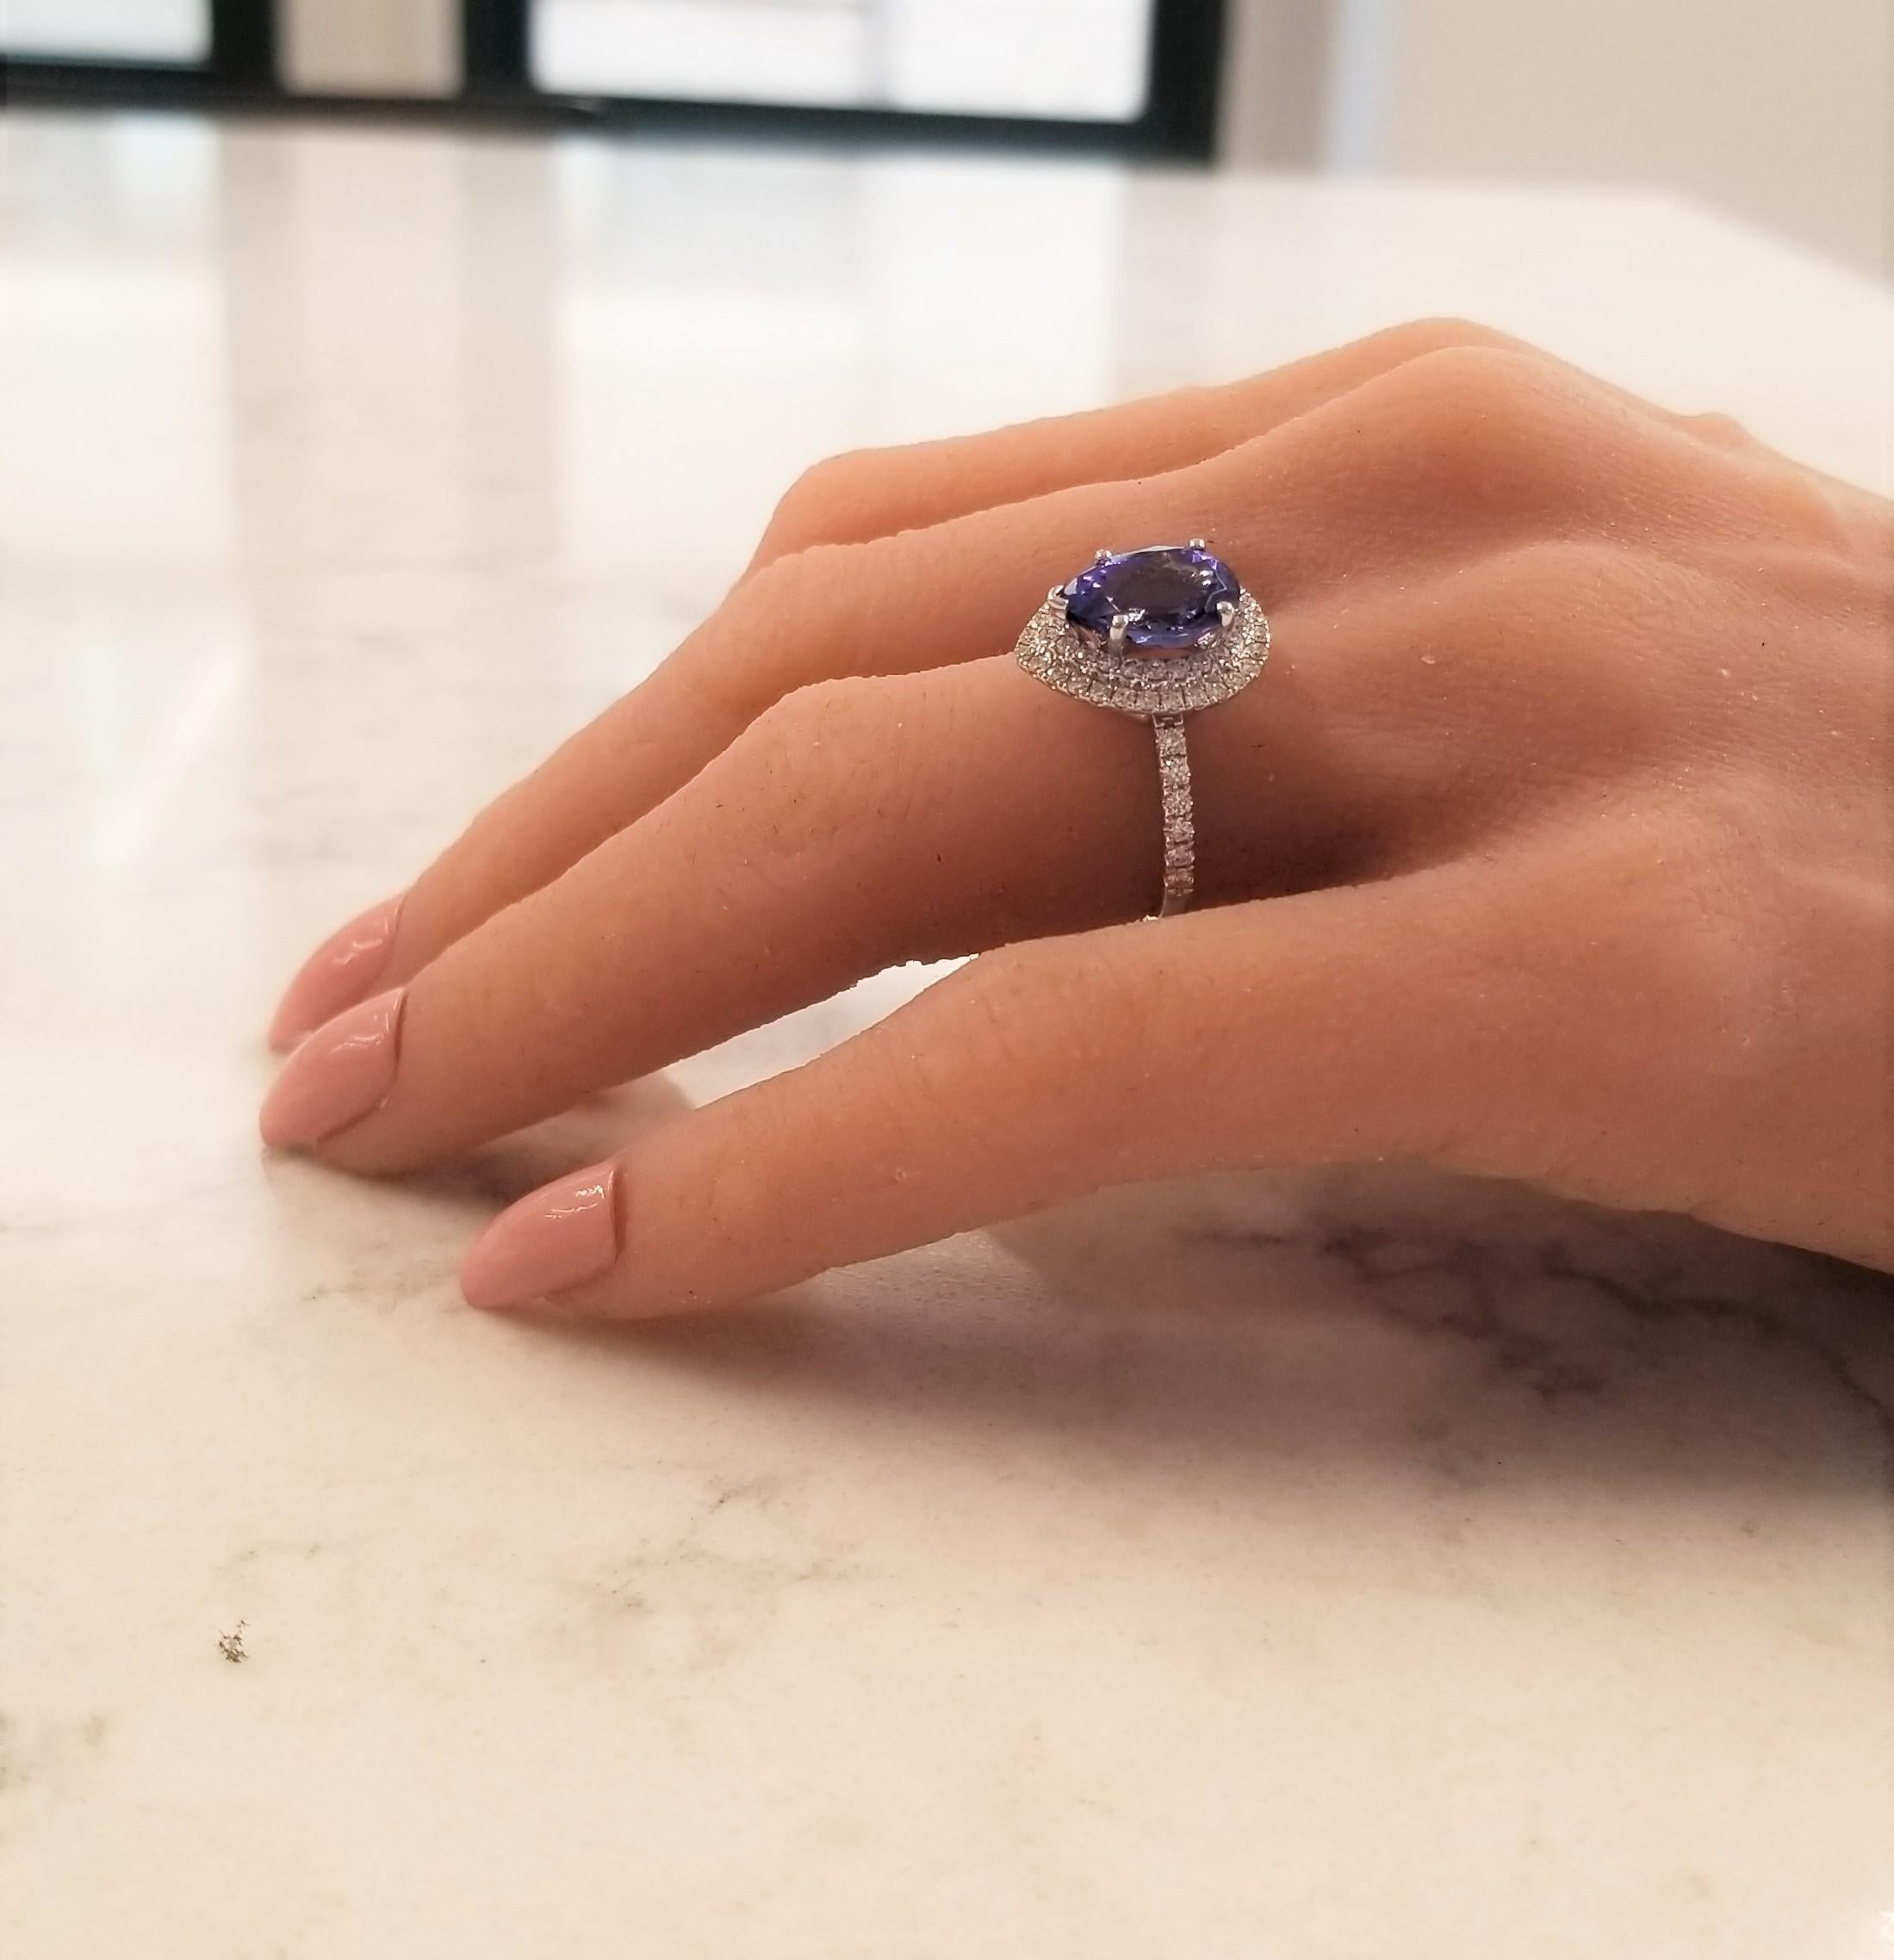 A 3.30 carat pear shaped tanzanite, prong set, measures 11.72 X 9.64mm. The gem source is near the foothills of Mt. Kilimanjaro in Tanzania. The intense blue-violet color resembles fine blue sapphire. The saturation is what you want; its